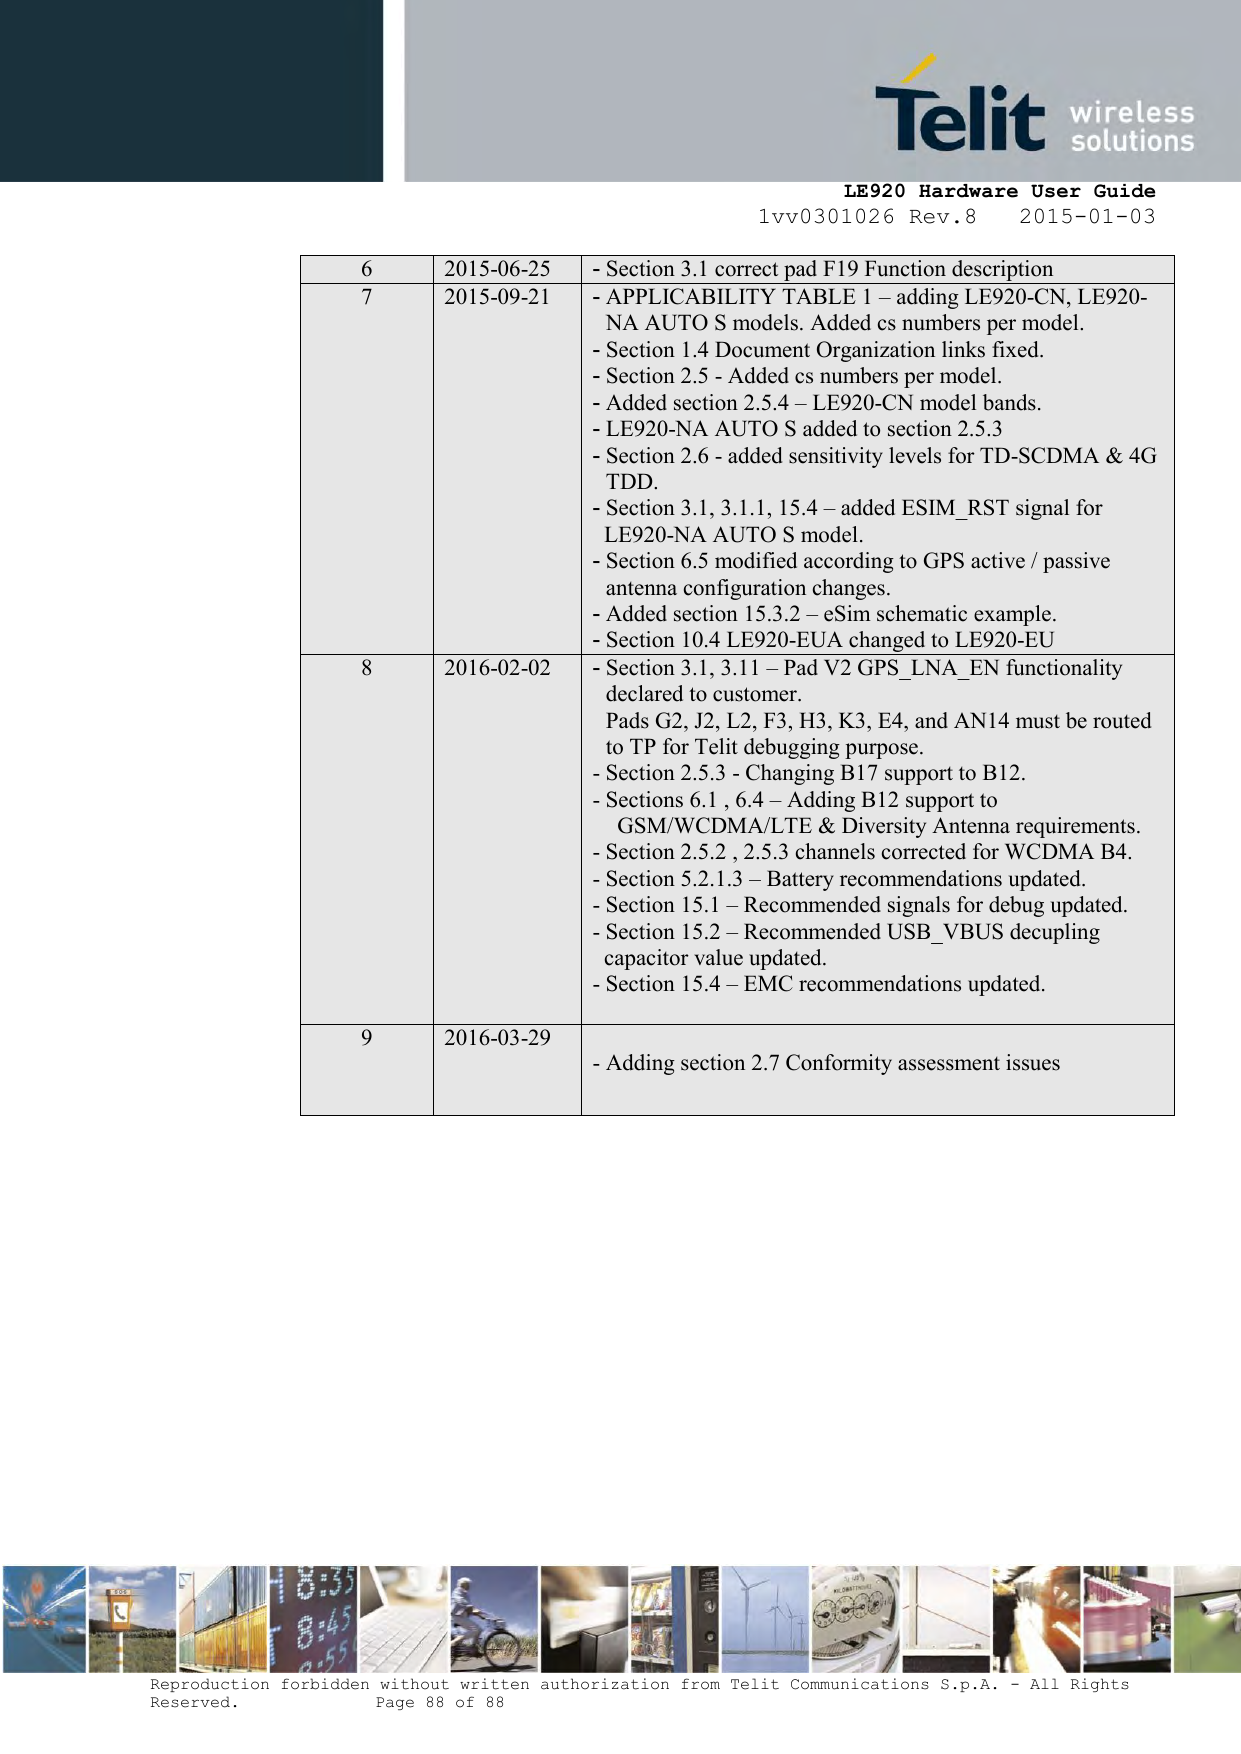     LE920 Hardware User Guide 1vv0301026 Rev.8   2015-01-03 Reproduction forbidden without written authorization from Telit Communications S.p.A. - All Rights Reserved.    Page 88 of 88  6 2015-06-25 - Section 3.1 correct pad F19 Function description  7 2015-09-21 - APPLICABILITY TABLE 1 – adding LE920-CN, LE920-NA AUTO S models. Added cs numbers per model.  - Section 1.4 Document Organization links fixed. - Section 2.5 - Added cs numbers per model. - Added section 2.5.4 – LE920-CN model bands. - LE920-NA AUTO S added to section 2.5.3 - Section 2.6 - added sensitivity levels for TD-SCDMA &amp; 4G TDD.  - Section 3.1, 3.1.1, 15.4 – added ESIM_RST signal for    LE920-NA AUTO S model. - Section 6.5 modified according to GPS active / passive antenna configuration changes. - Added section 15.3.2 – eSim schematic example. - Section 10.4 LE920-EUA changed to LE920-EU 8 2016-02-02 - Section 3.1, 3.11 – Pad V2 GPS_LNA_EN functionality  declared to customer.  Pads G2, J2, L2, F3, H3, K3, E4, and AN14 must be routed   to TP for Telit debugging purpose. - Section 2.5.3 - Changing B17 support to B12. - Sections 6.1 , 6.4 – Adding B12 support to    GSM/WCDMA/LTE &amp; Diversity Antenna requirements. - Section 2.5.2 , 2.5.3 channels corrected for WCDMA B4. - Section 5.2.1.3 – Battery recommendations updated. - Section 15.1 – Recommended signals for debug updated. - Section 15.2 – Recommended USB_VBUS decupling    capacitor value updated. - Section 15.4 – EMC recommendations updated.  9 2016-03-29 - Adding section 2.7 Conformity assessment issues   